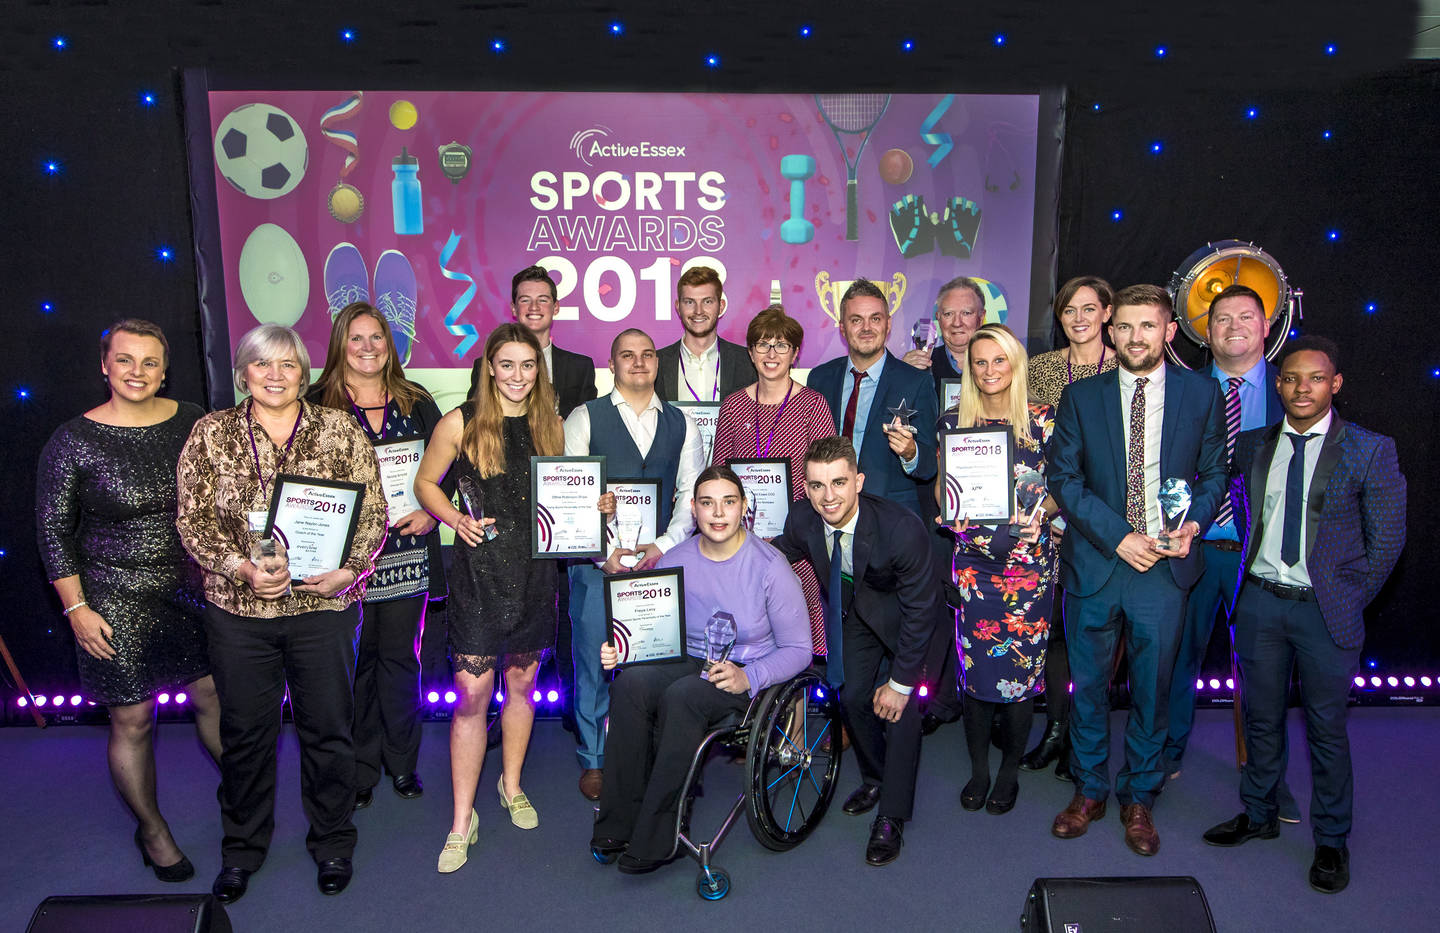 All the winners at the Active Essex Sports Awards 2018 with Max Whitlock (Credit: Active Essex)